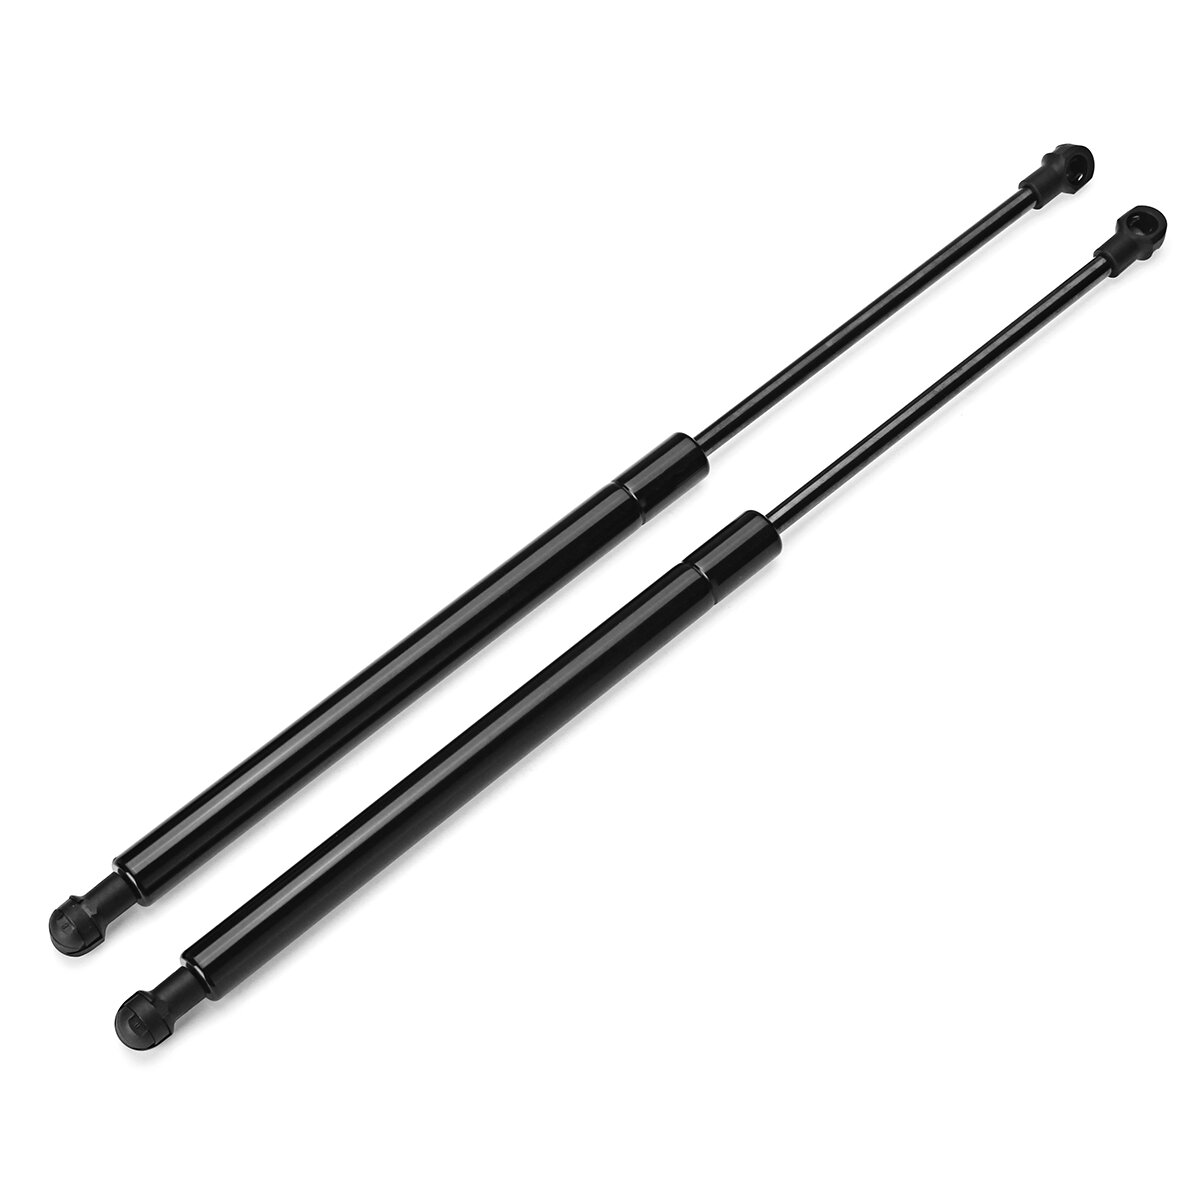 Liftgate Tail Gate Door Hatch Supports Shocks Gas Spring Struts For Volvo V50 2005-11